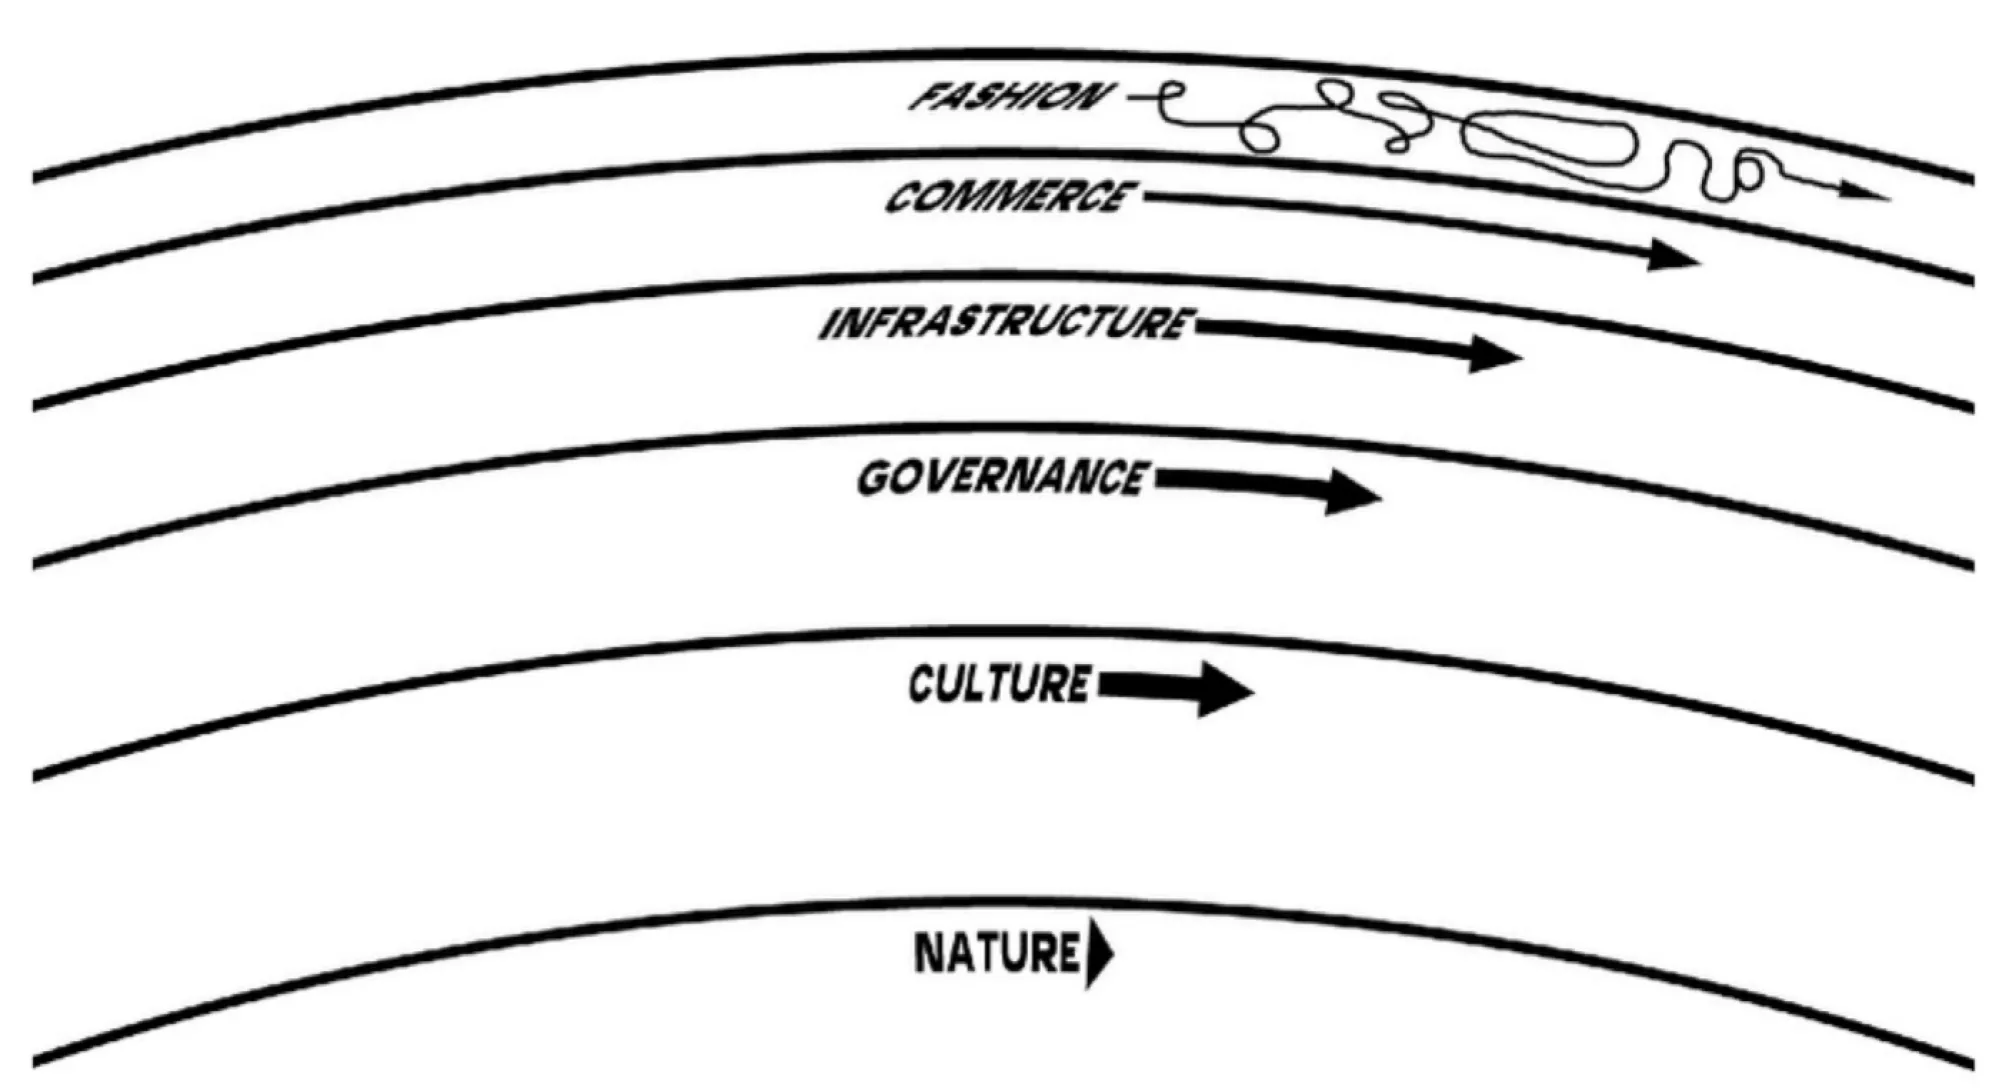 An illustration of pace layers with concentric rings from nature through culture, governance, infrastructure, commerce, through to fashion